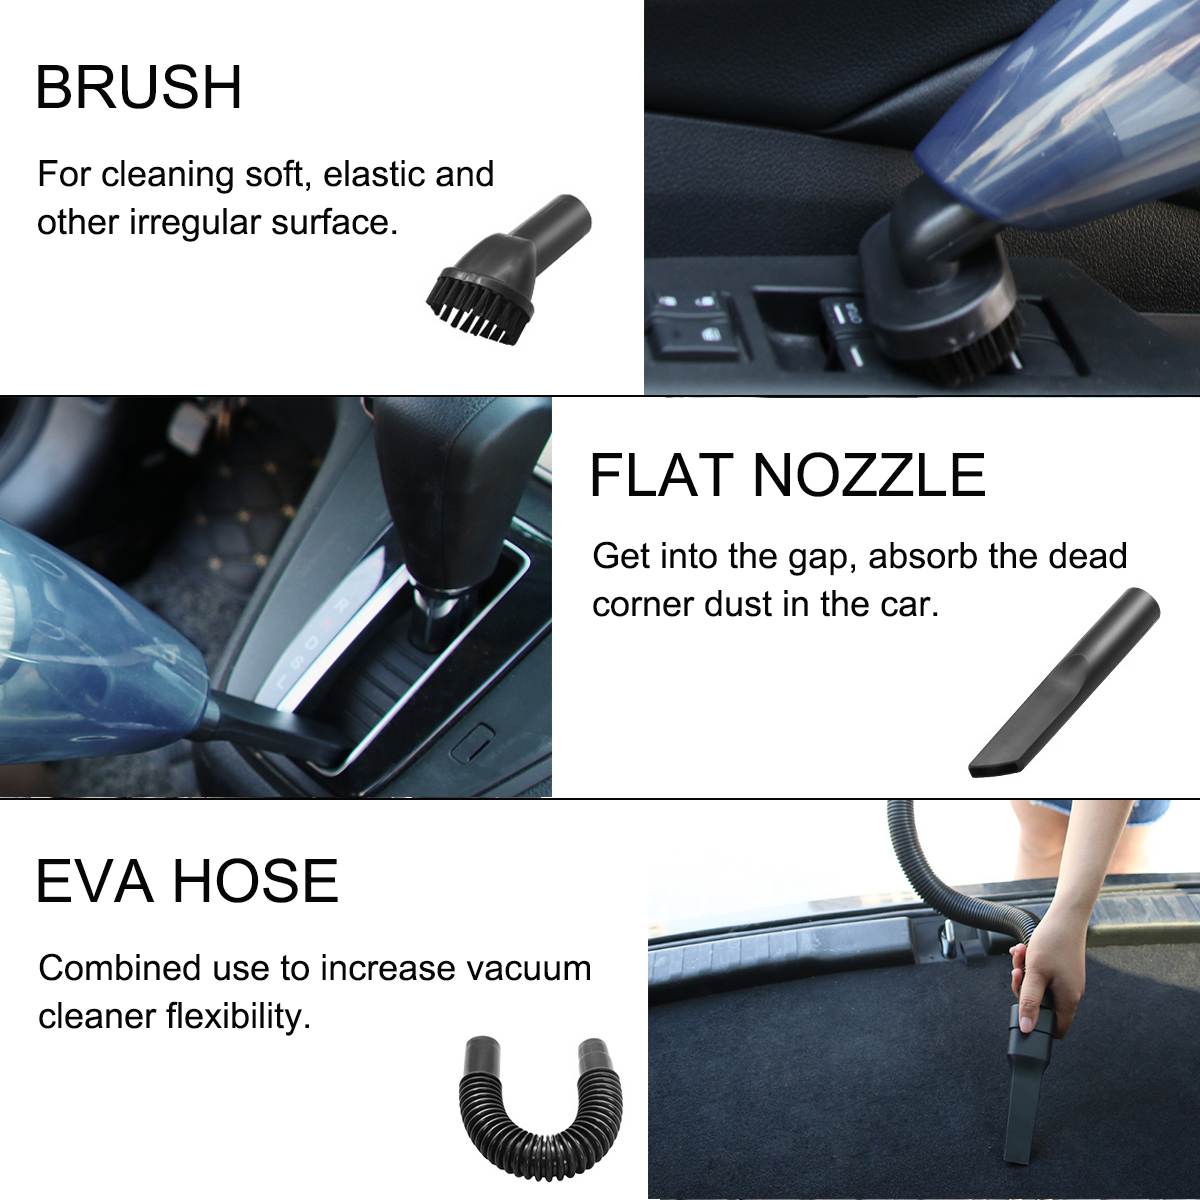 Wireless Home Car Vacuum Cleaner 120W USB Cordless 6500Pa High Power Wet Dry Portable Handheld Vacuum Cleaner